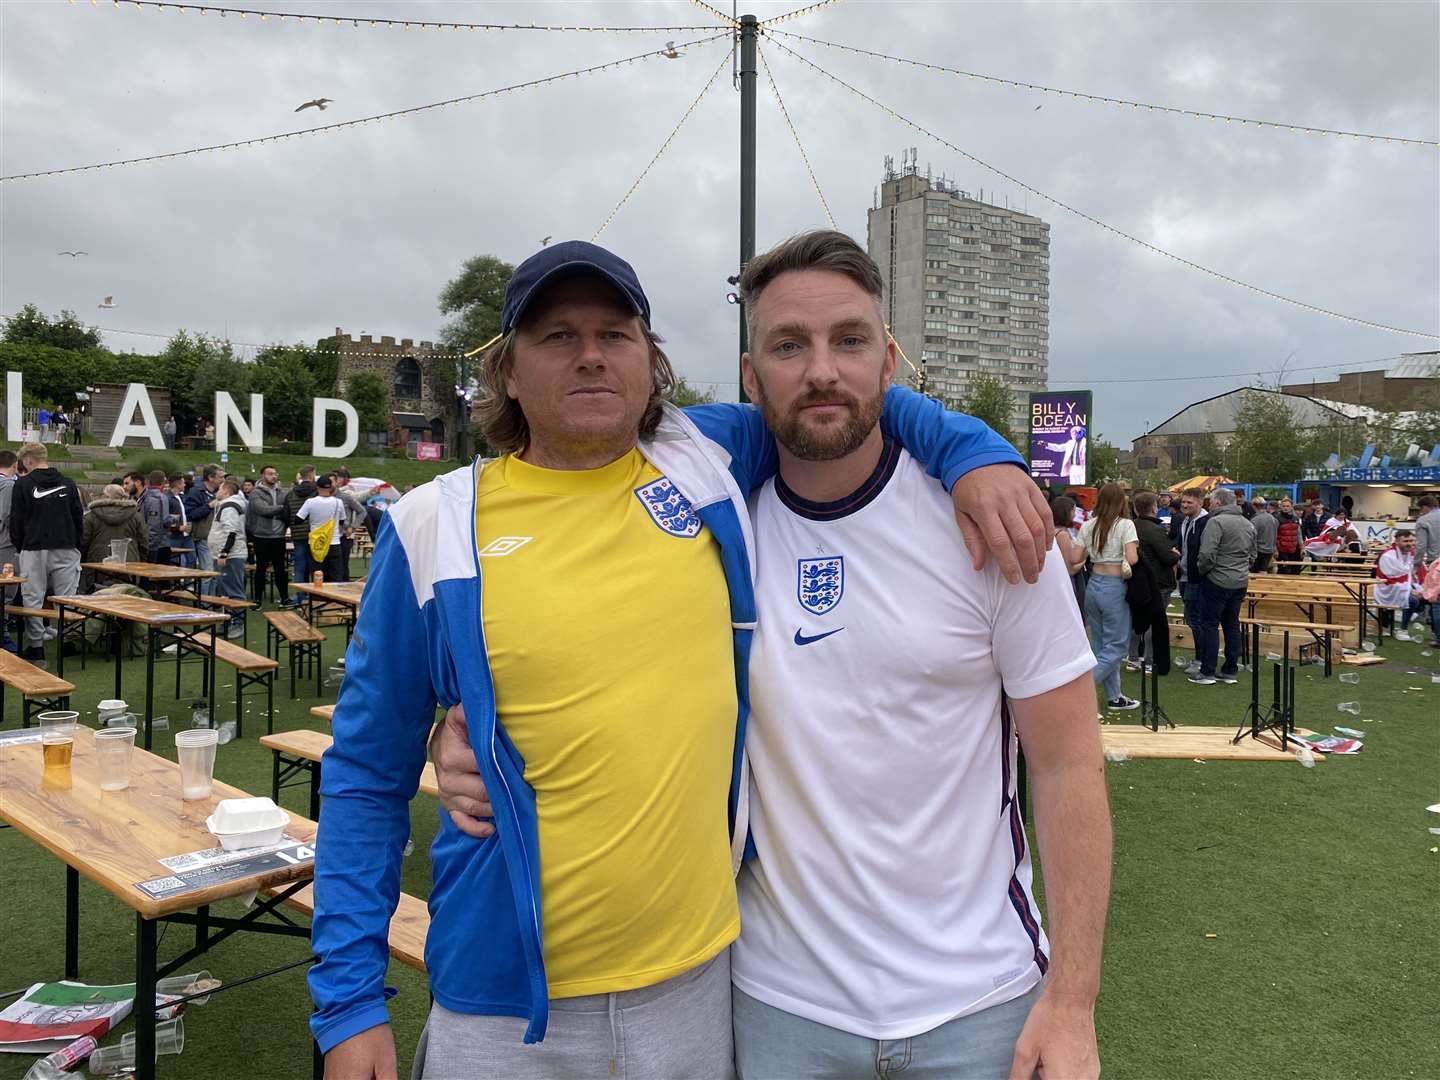 Rickie Cunningham (right) with friend Craig Aust had a great time at Dreamland watching England beat Germany